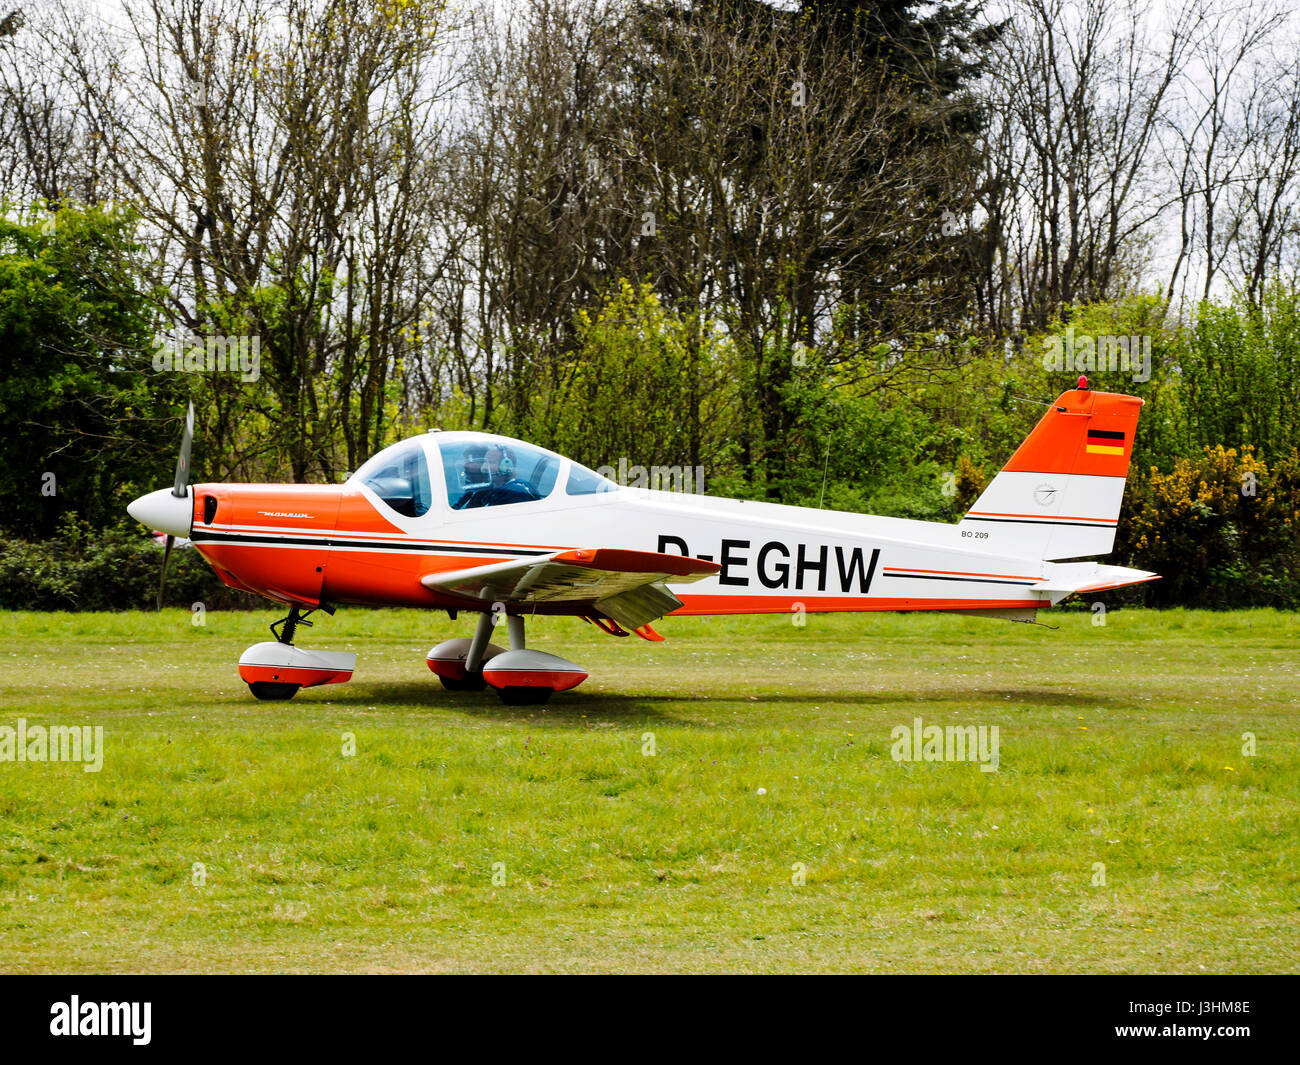 D-EGHW  is a private Bolkow BO.209 Monsoon 150FV light aircraft seen here after landing at Popham Airfield in Hampshire in May 2017. Stock Photo